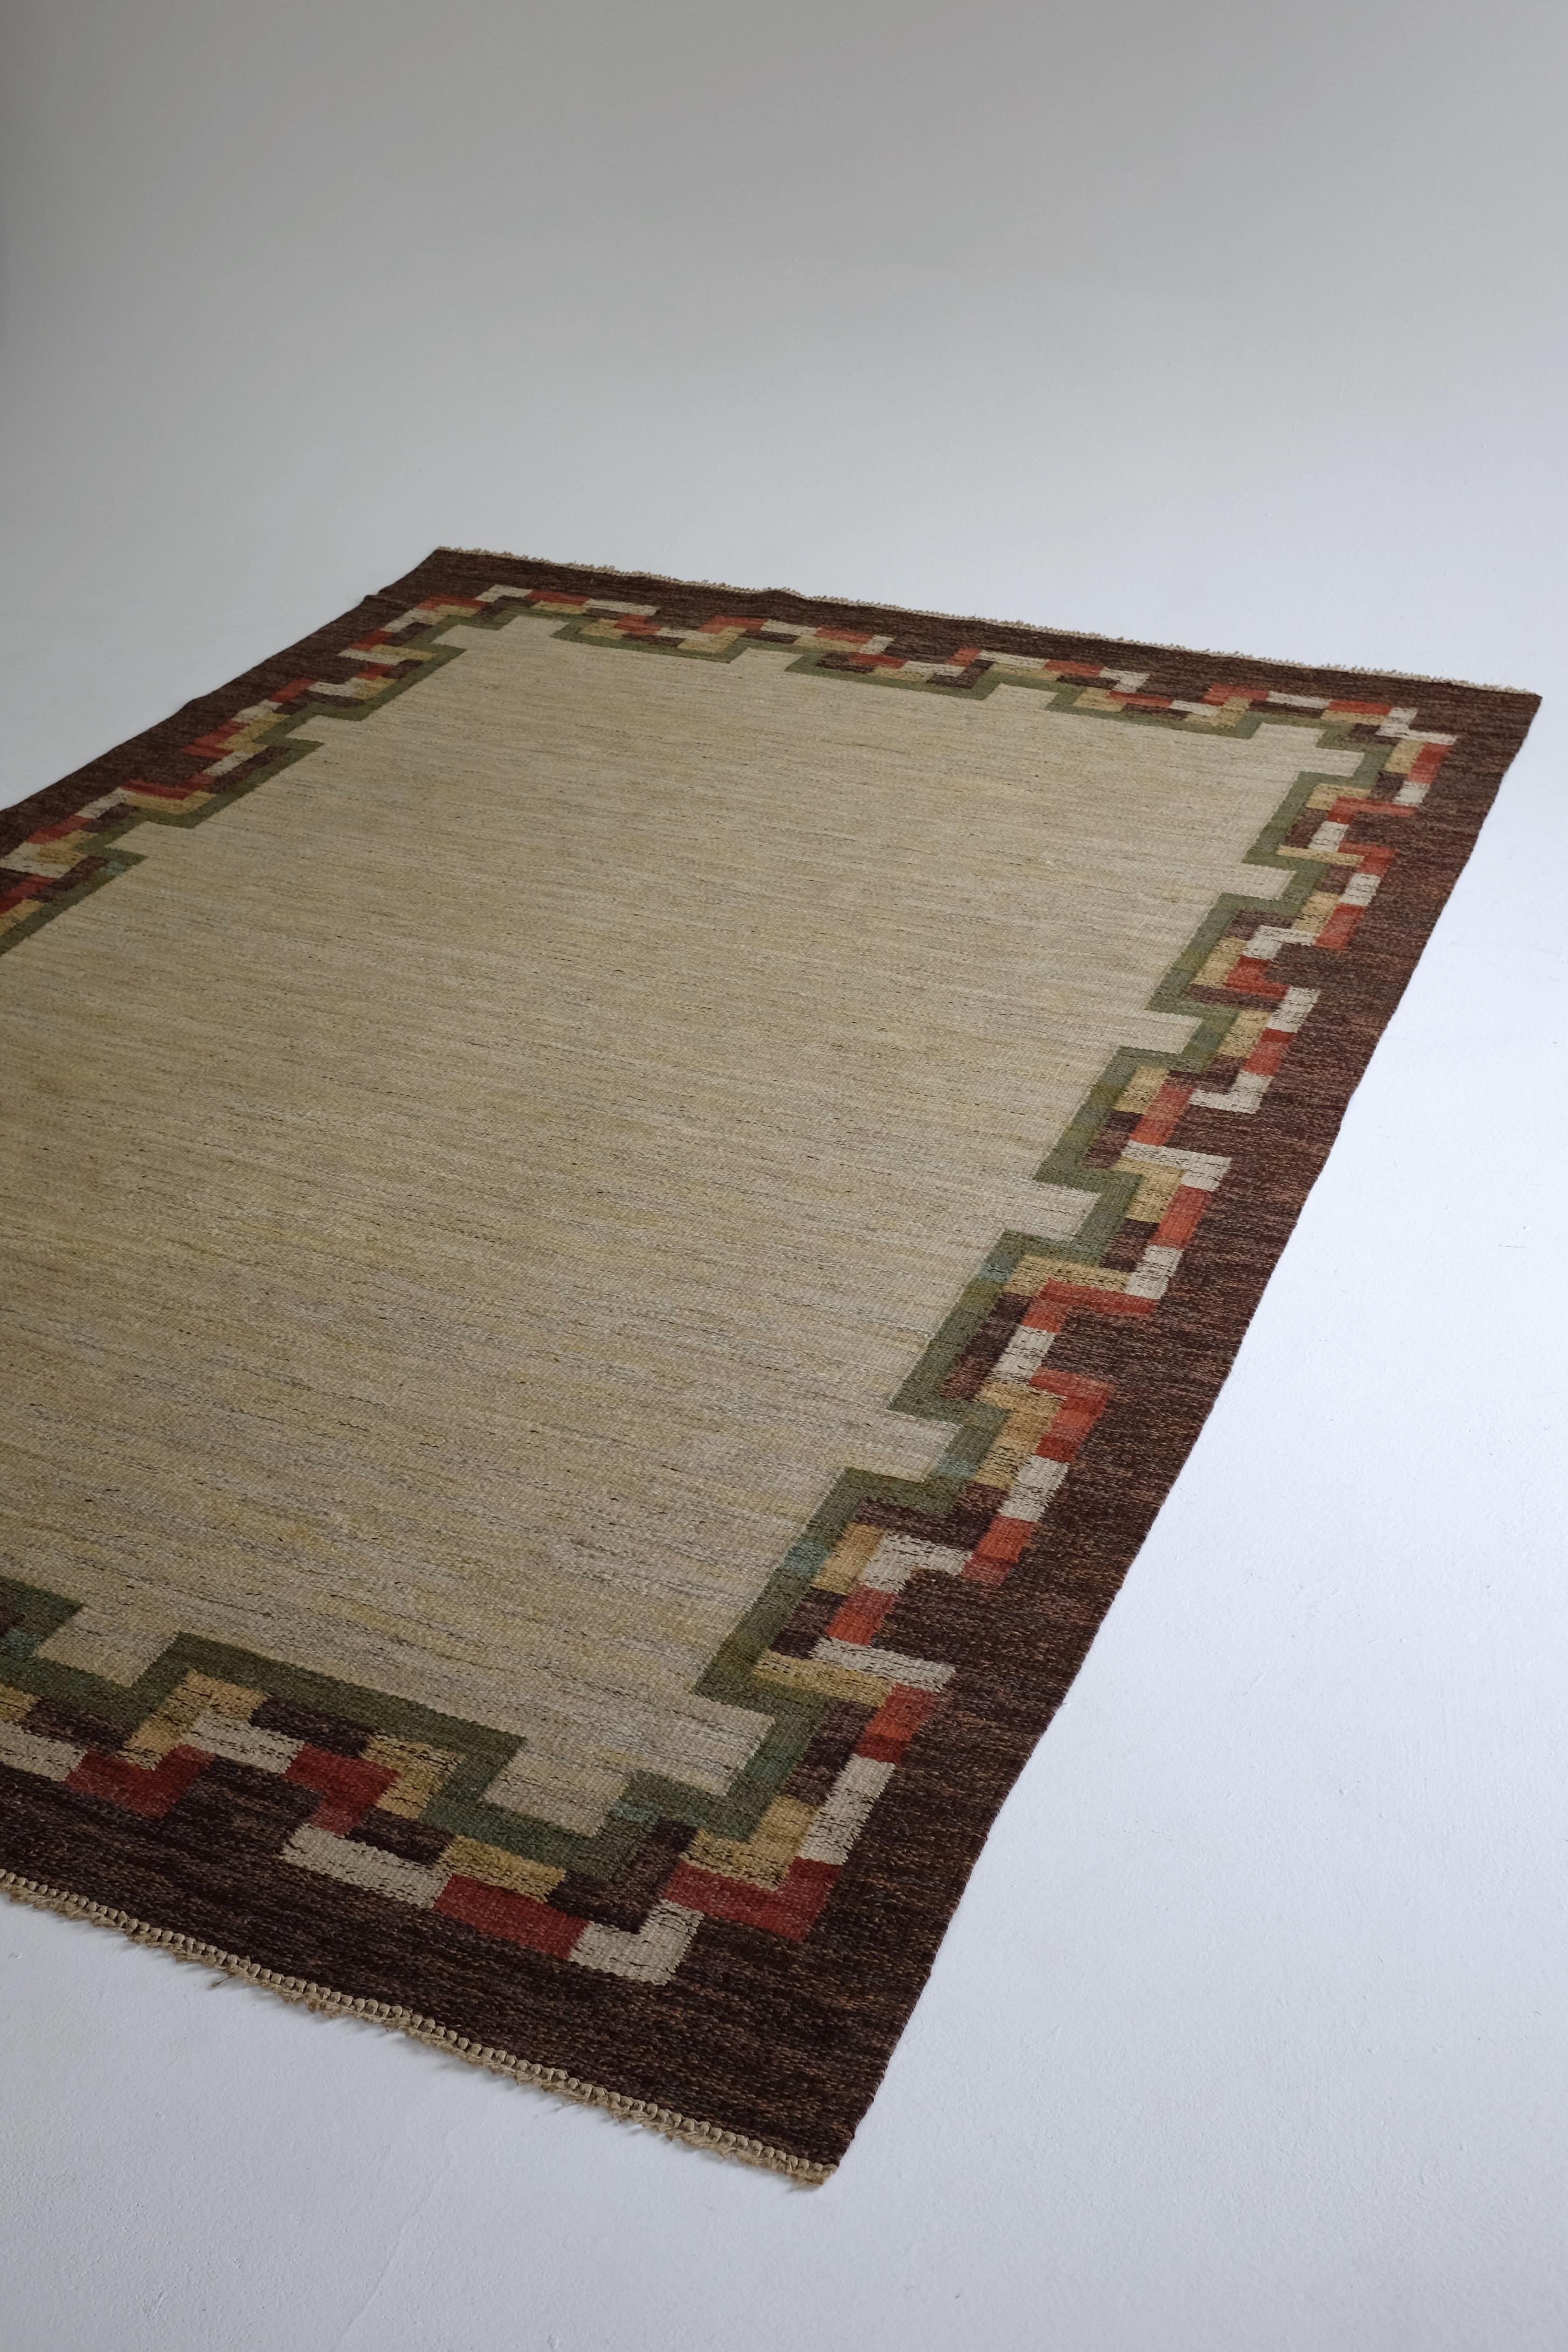 Large Vintage Swedish Kilim rug by unknown designer. Brown border with a green, white and red geometric design against a large beige central area. Fringes have been shortened and with mild wear it is in a very good condition. 

Dimensions: L 120